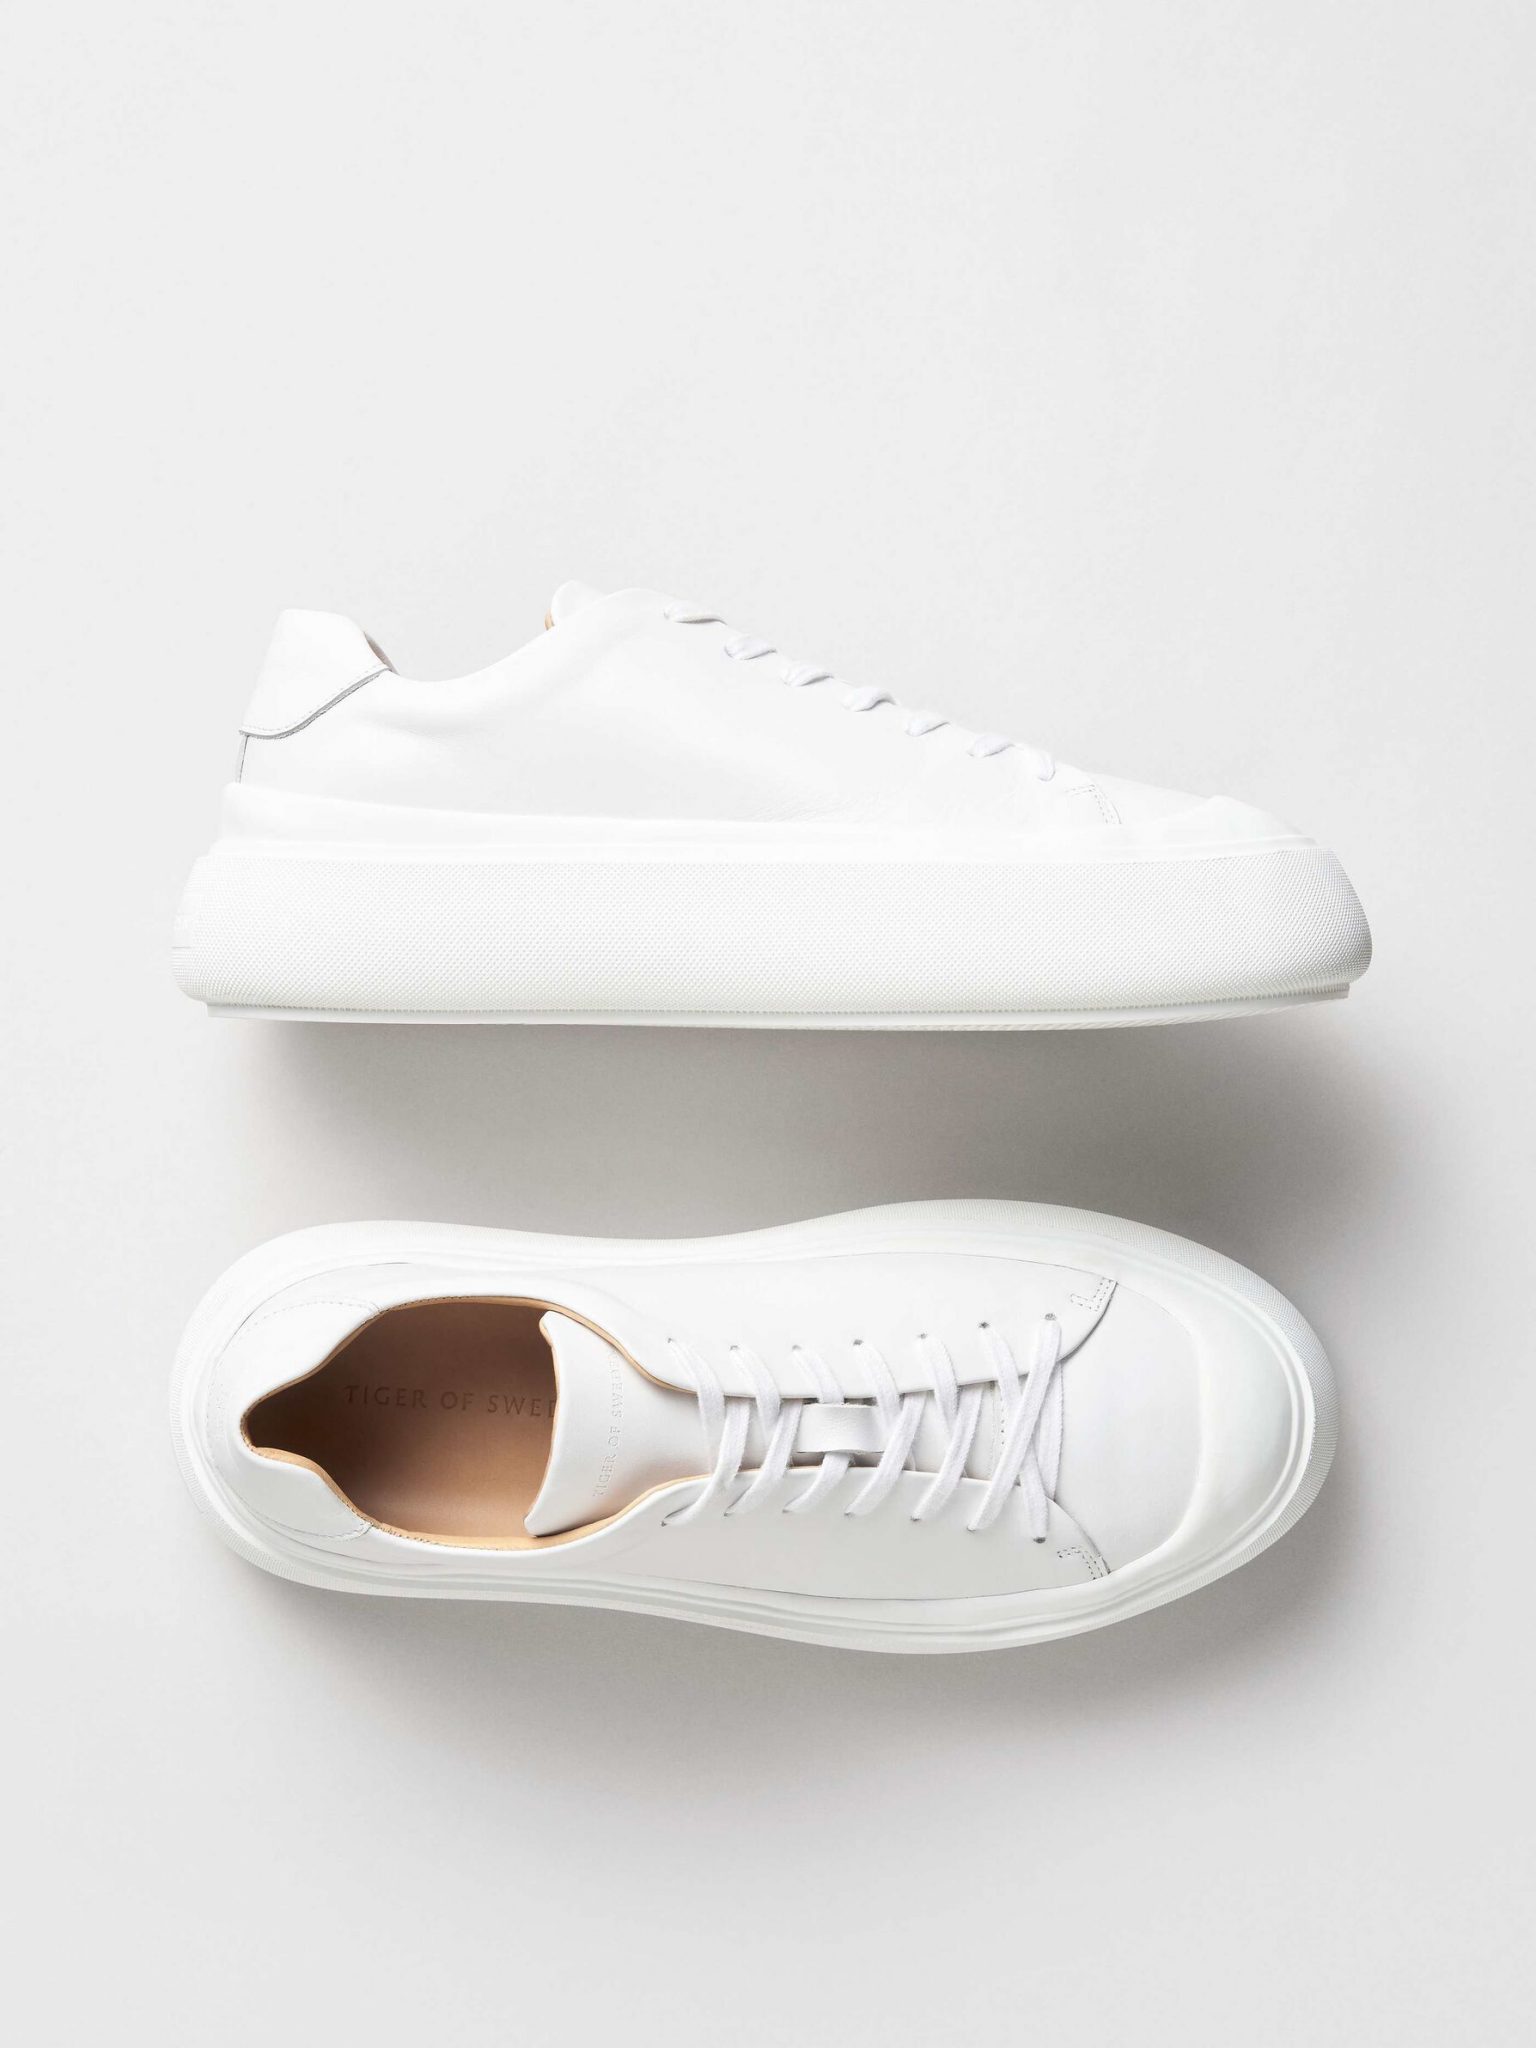 ZARA CHUNKY SOLE SNEAKERS WHITE SHOES REF.1417/301 BLOGGERS FAVORITE | eBay